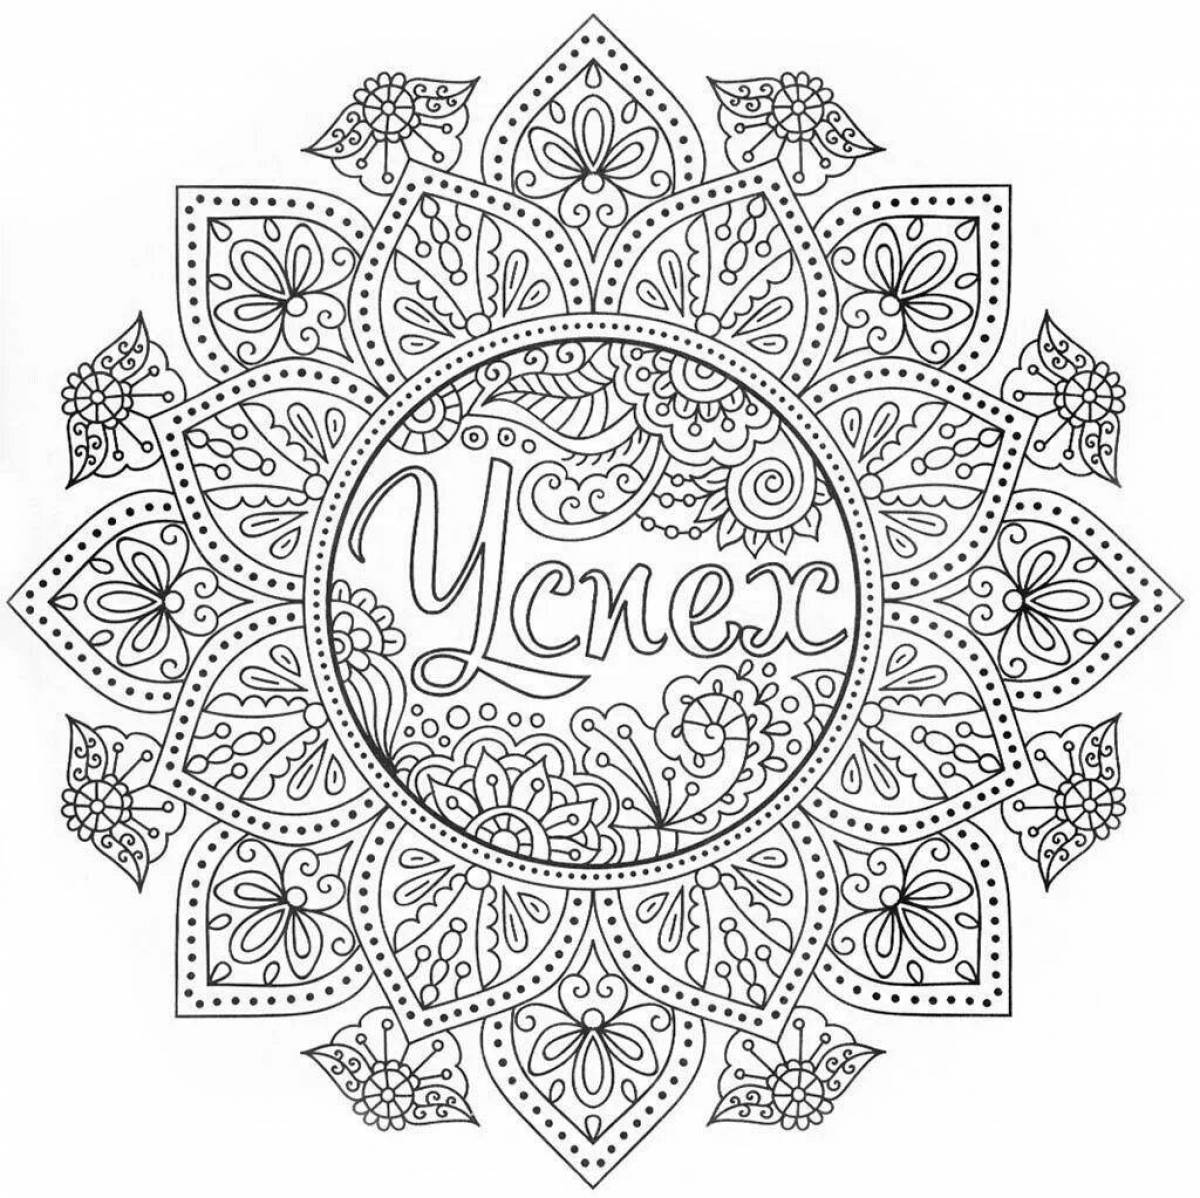 Mandala for good luck and success in everything #5